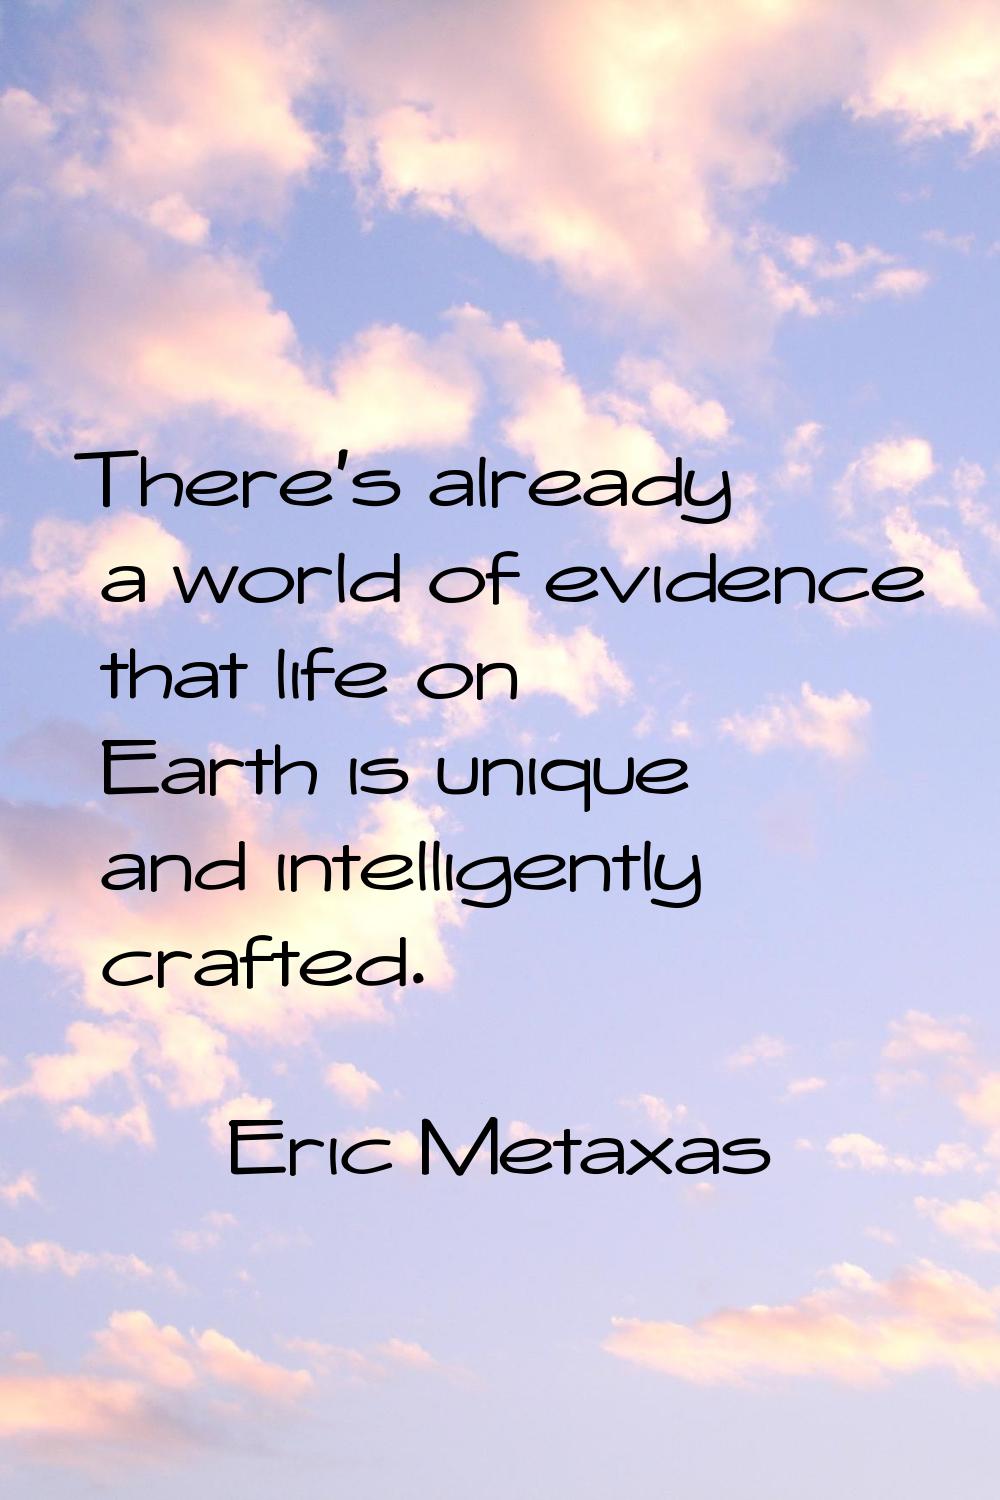 There's already a world of evidence that life on Earth is unique and intelligently crafted.